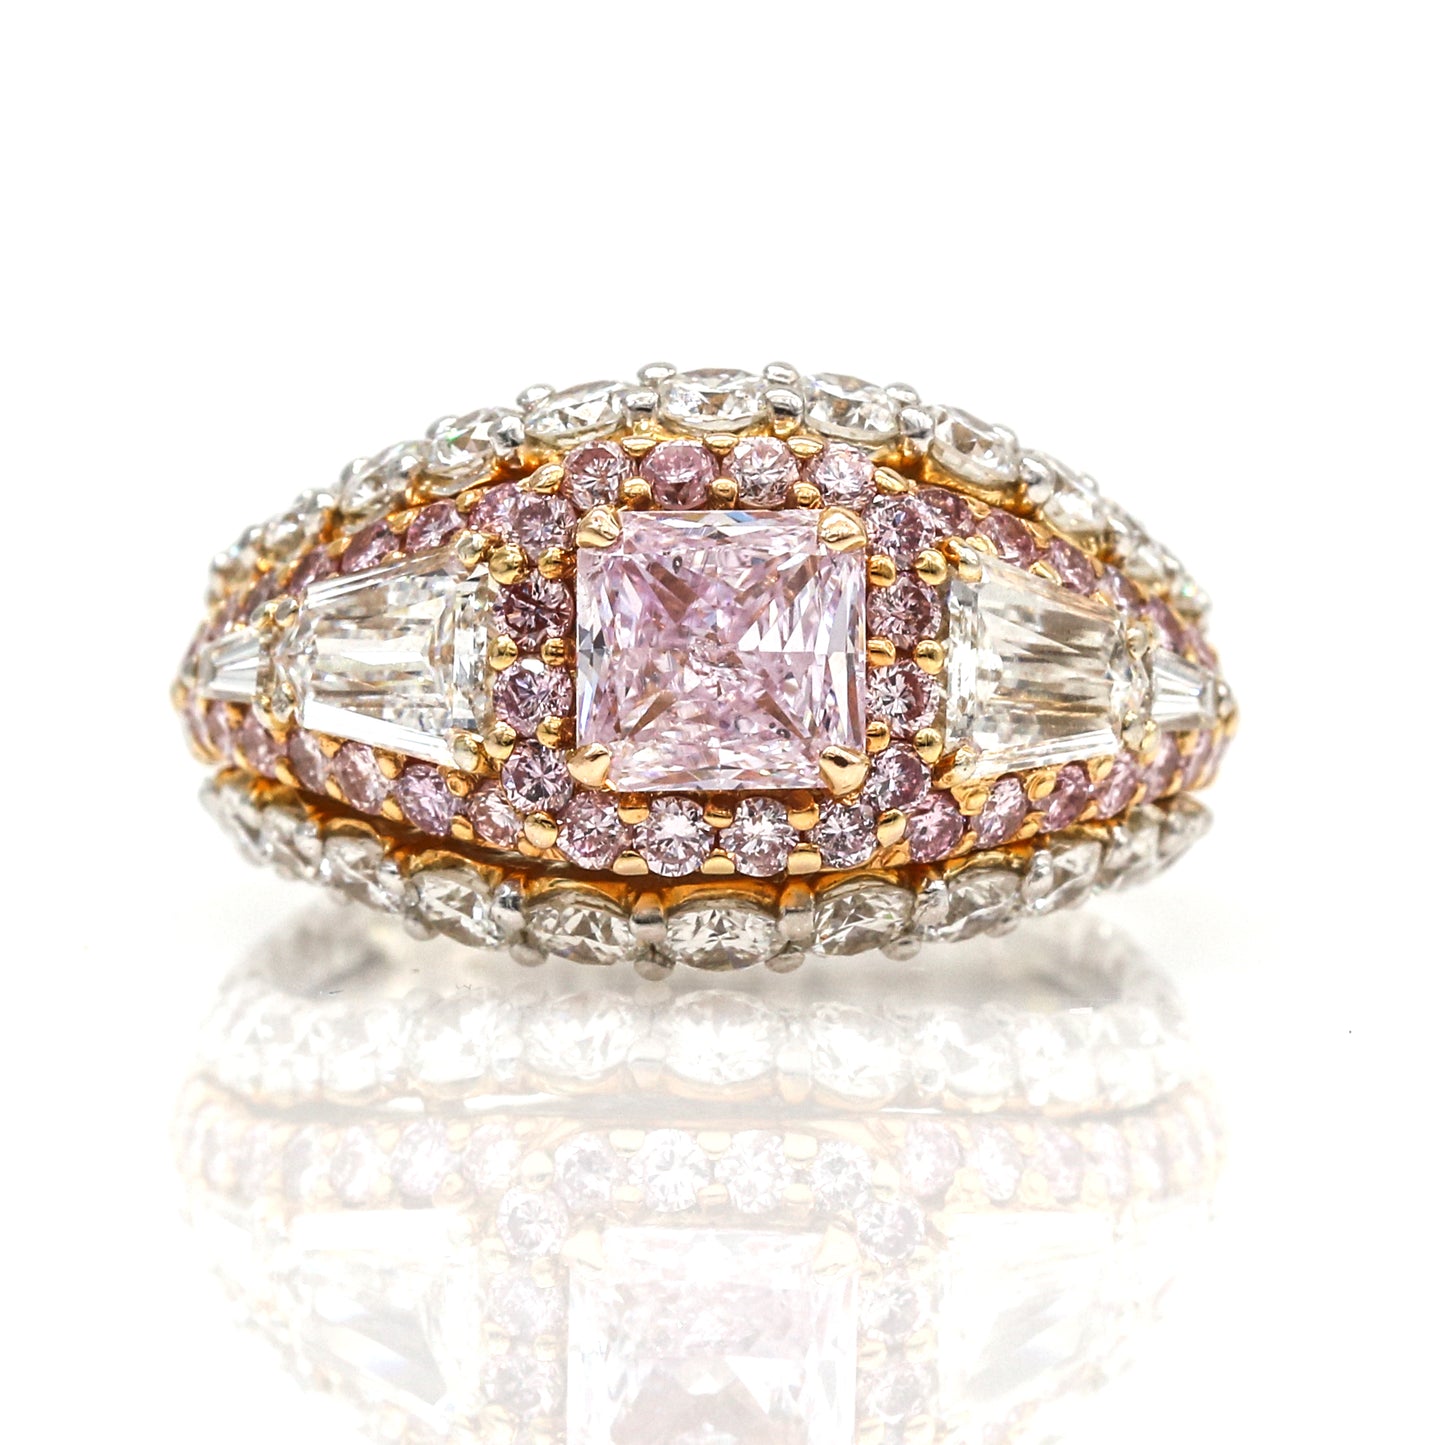 GIA Certified Fancy Pink Diamond Engagement Ring in Platinum and 18k Gold